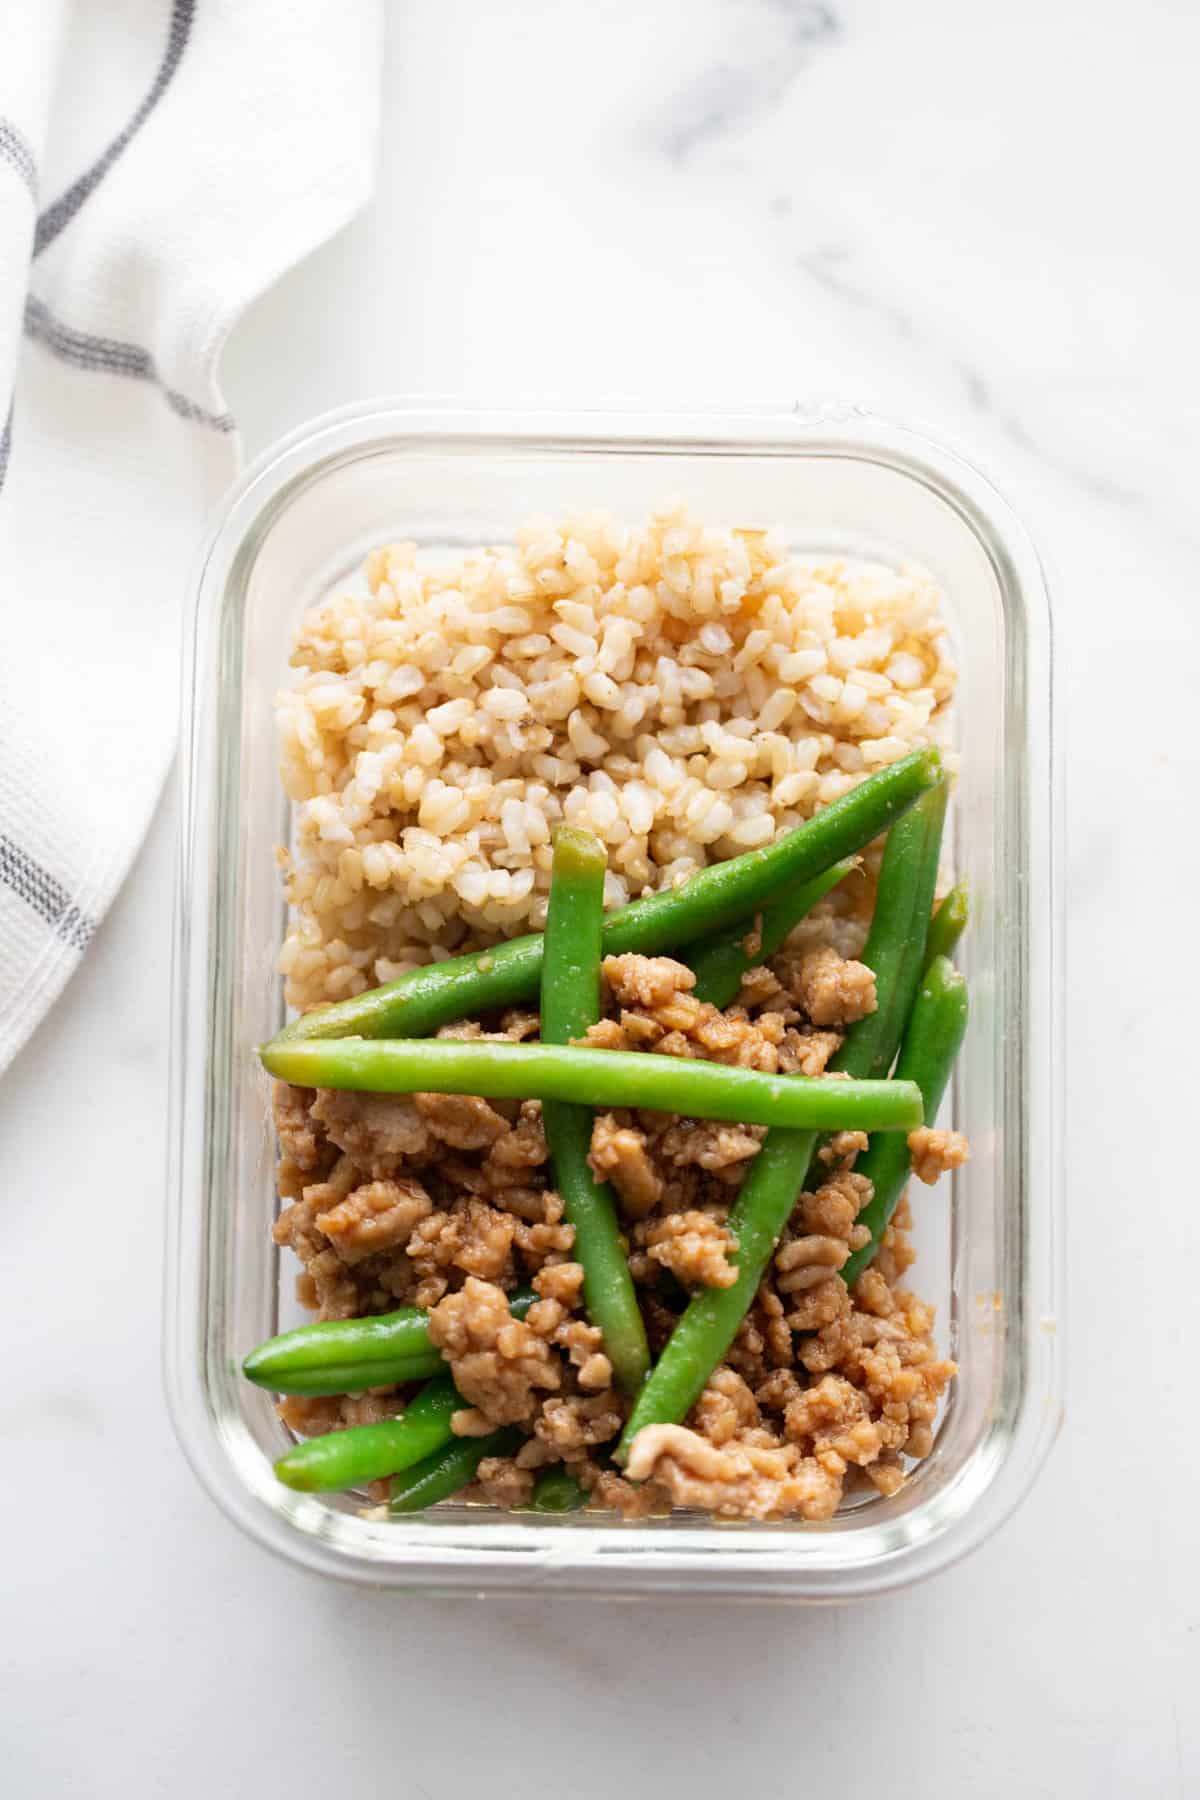 A glass meal prep container with brown rice and ground chicken stir fry and green beans.